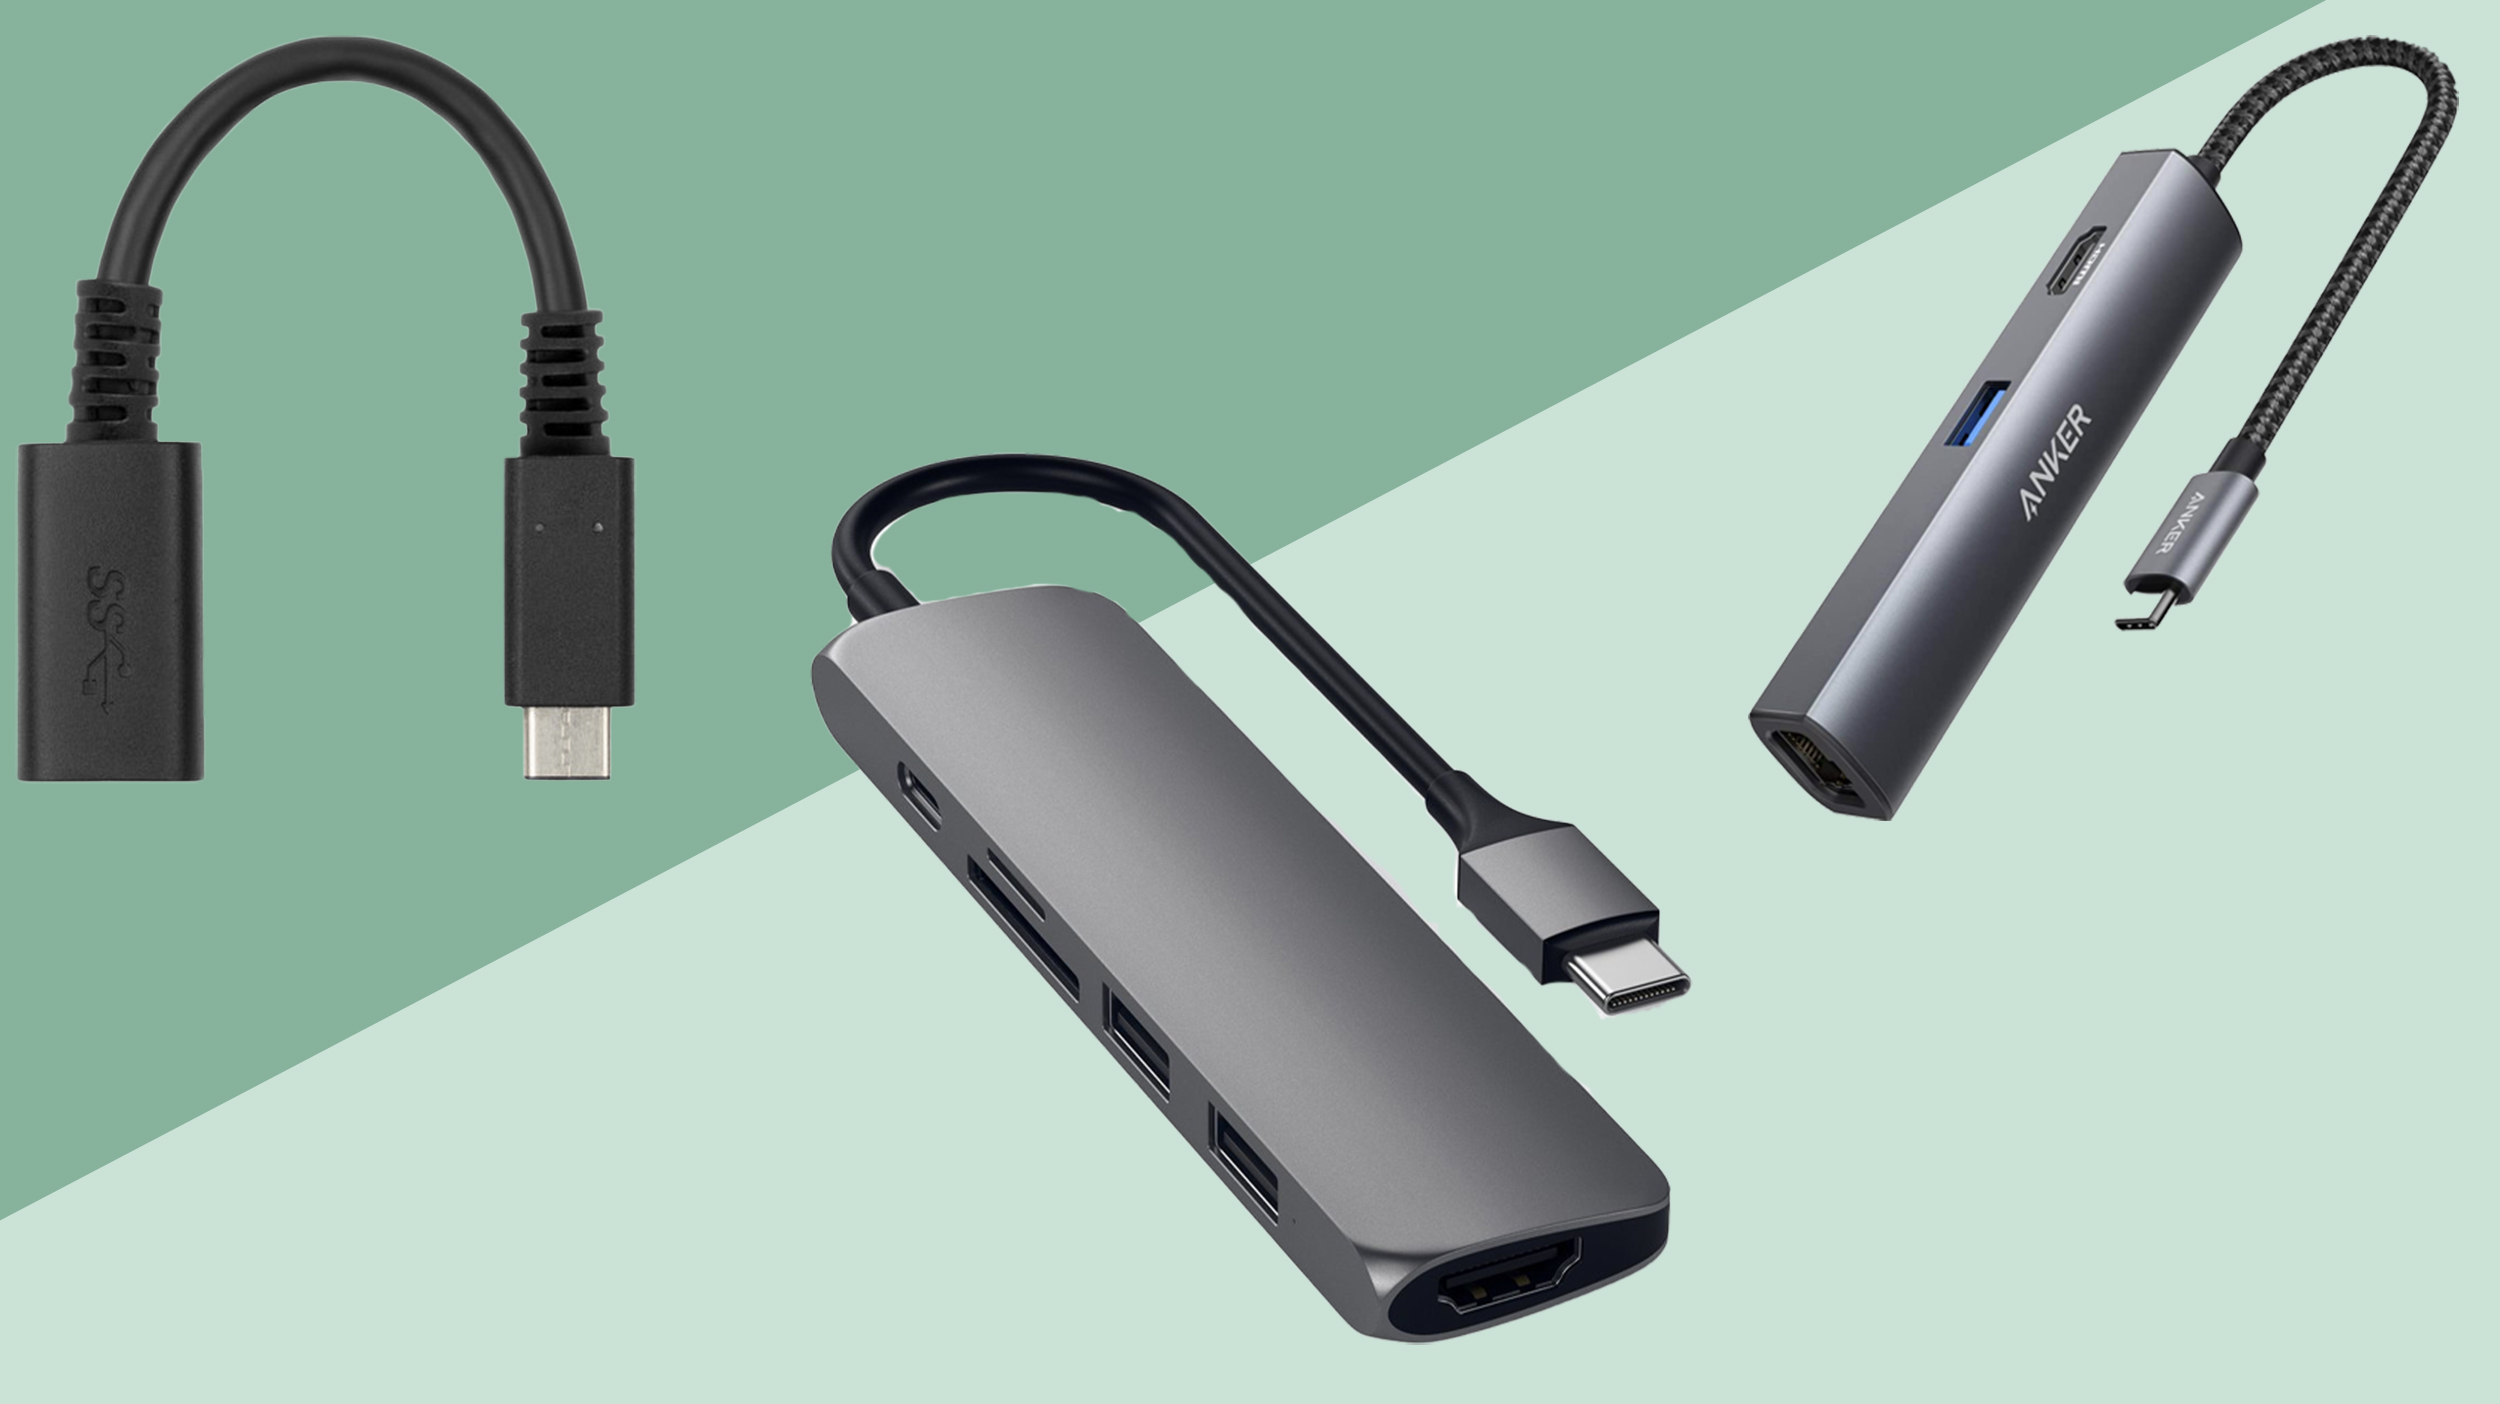 Usb C Accessories Usb C Hubs Adapters And Dongles Cnn Underscored